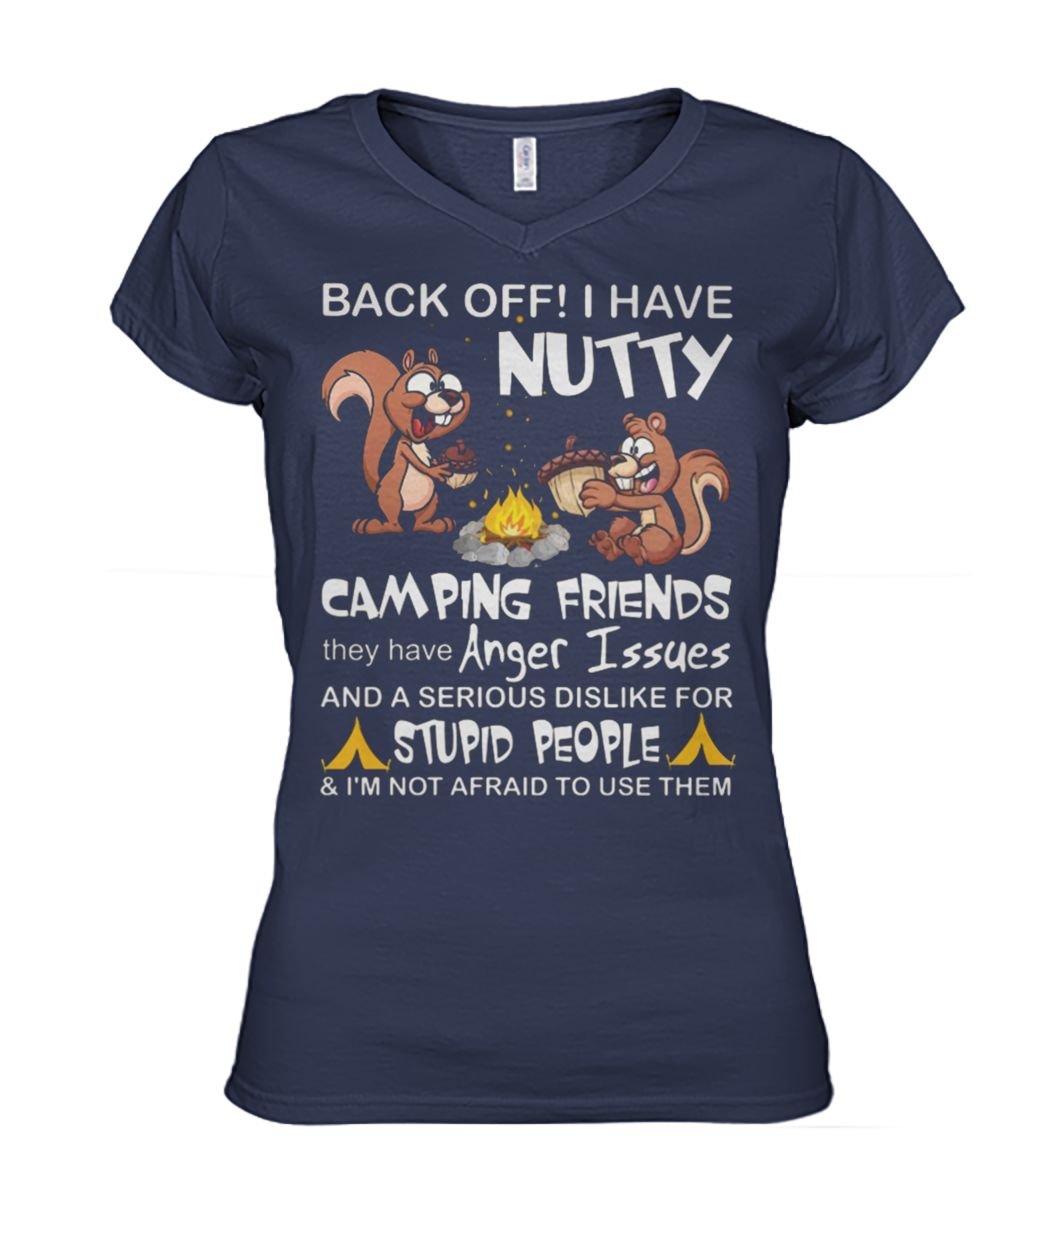 Squirrels back off I have nutty camping friends women's v-neck